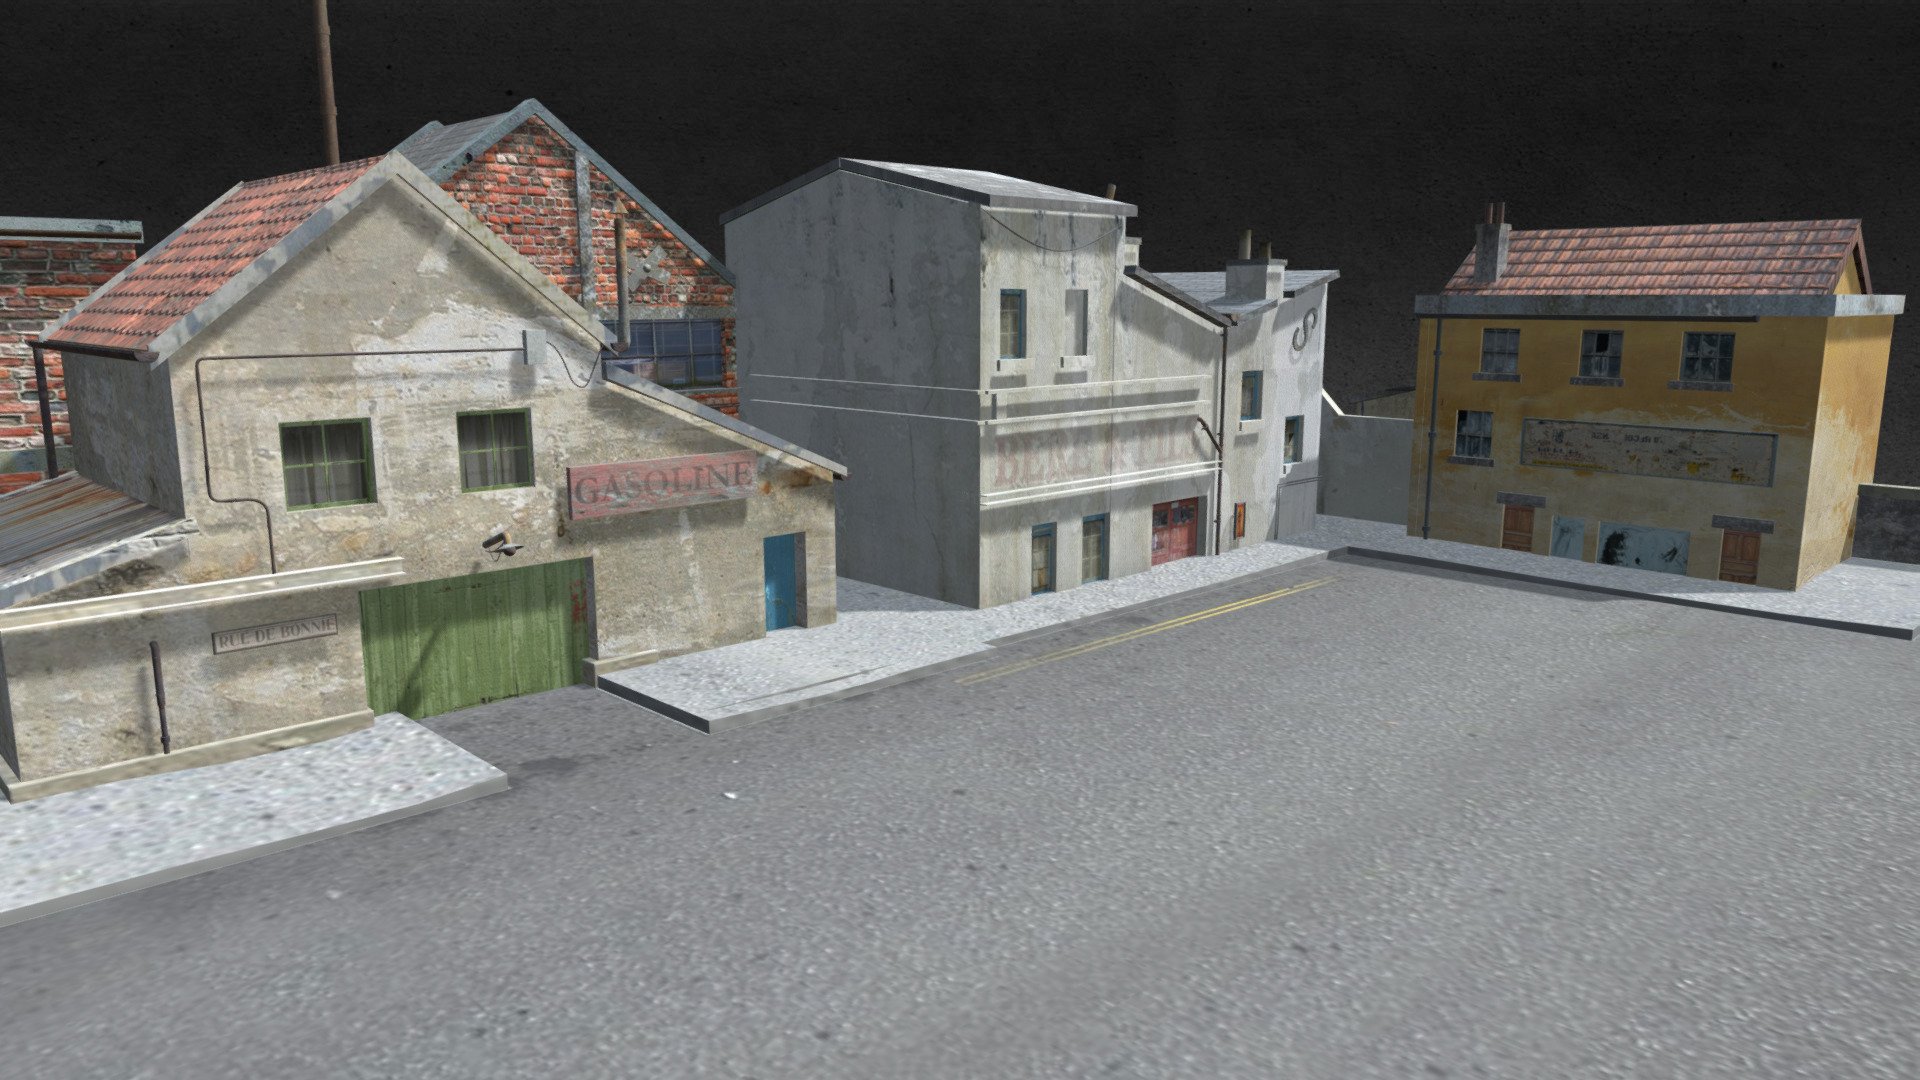 In the style of a old French Village - historical period anything from the 16th century to today - this model includes five low-poly buildings, a ground base, and a telephone pole.

Includes file with all of the following models already positioned in place:




Building 1

Building 2

Building 3

Building 4

Building 5

Ground/ street

Phone Pole

All models are fully textured for maximum realism.
Note: No texture templates are included. If you want to make your own textures, use the existing textures as a guide.

The obj file contains &ldquo;group